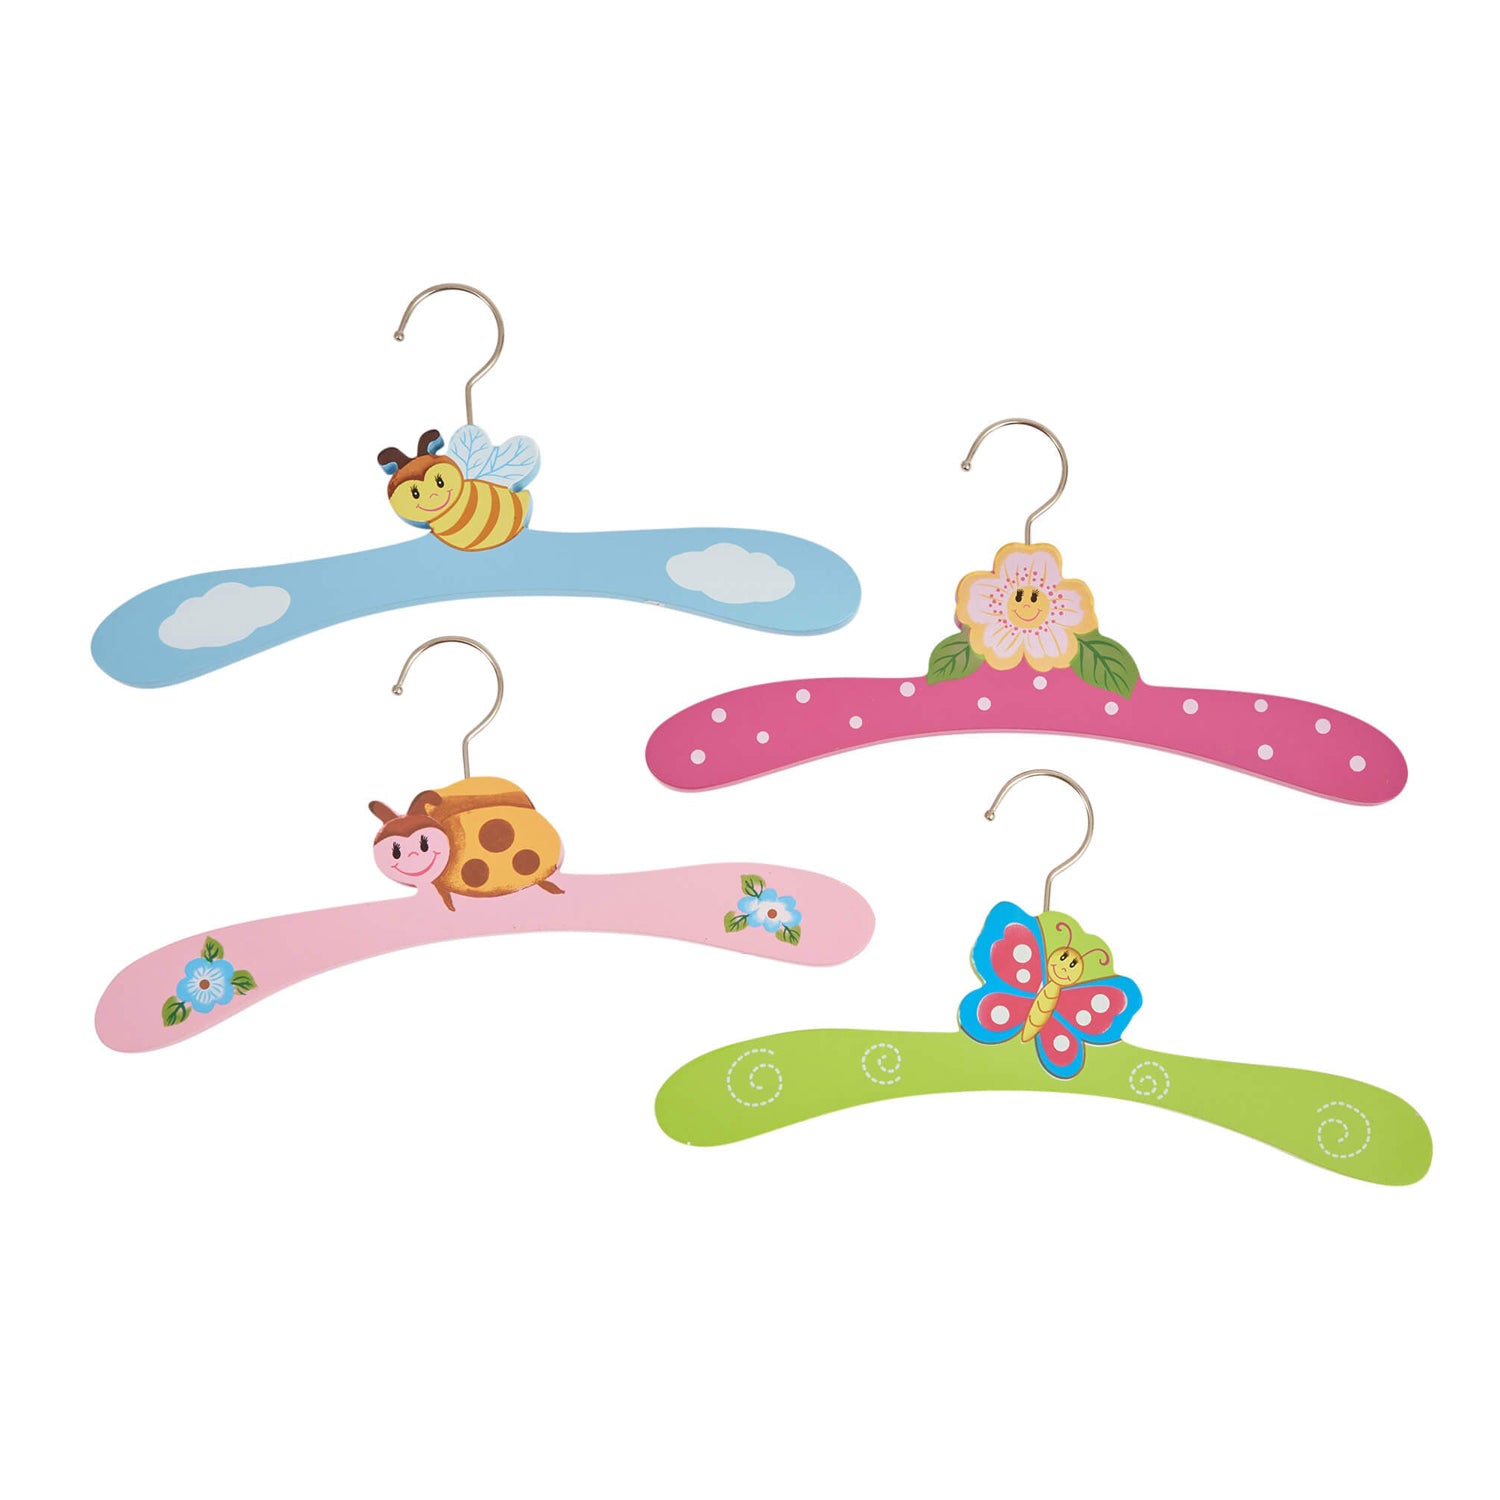 Fairy Dress Up Storage Centre by Liberty House Toys